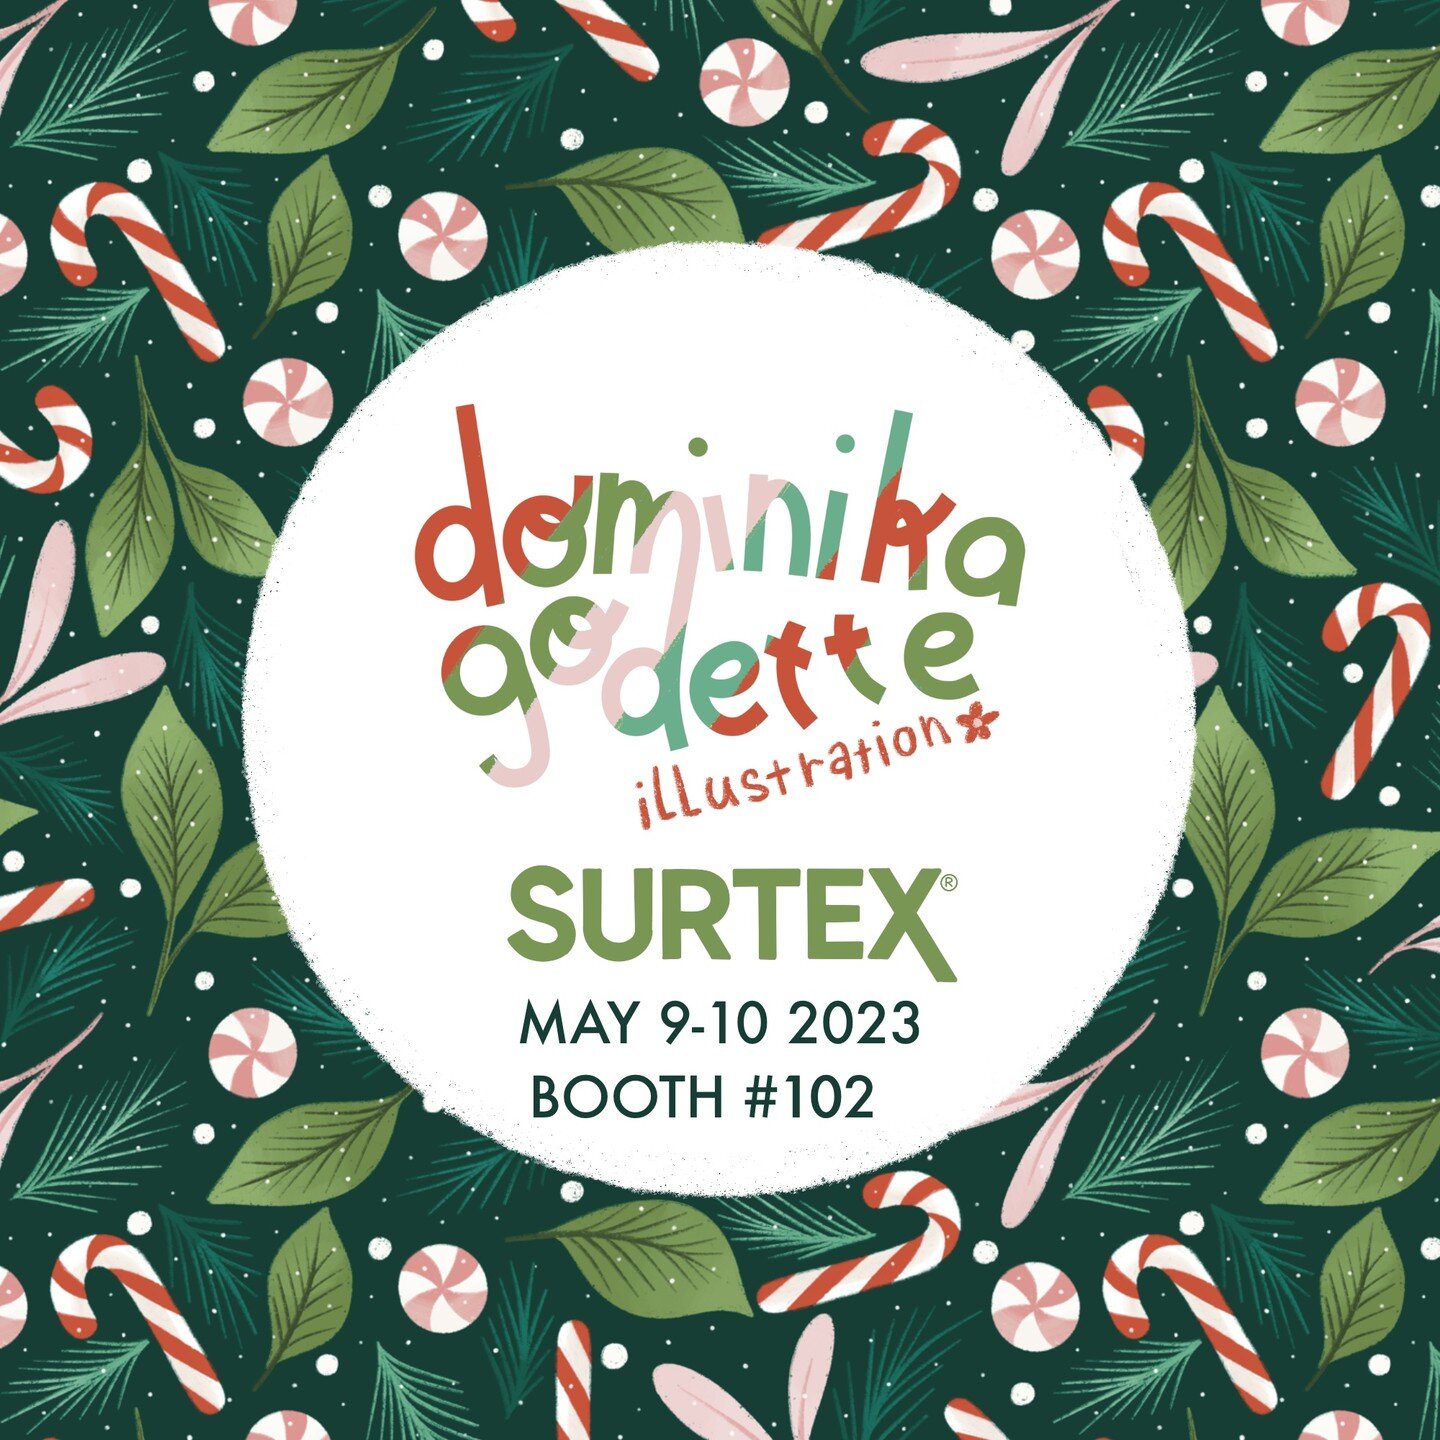 HOHOHO is it too early to start thinking about Christmas? 🎄 
If you are looking for some fresh Holiday art to make your product pop, come see me at @surtexshow in two weeks. I'll be exhibiting so many new Christmas designs!
.
.
.
#surtex2023 #surfac